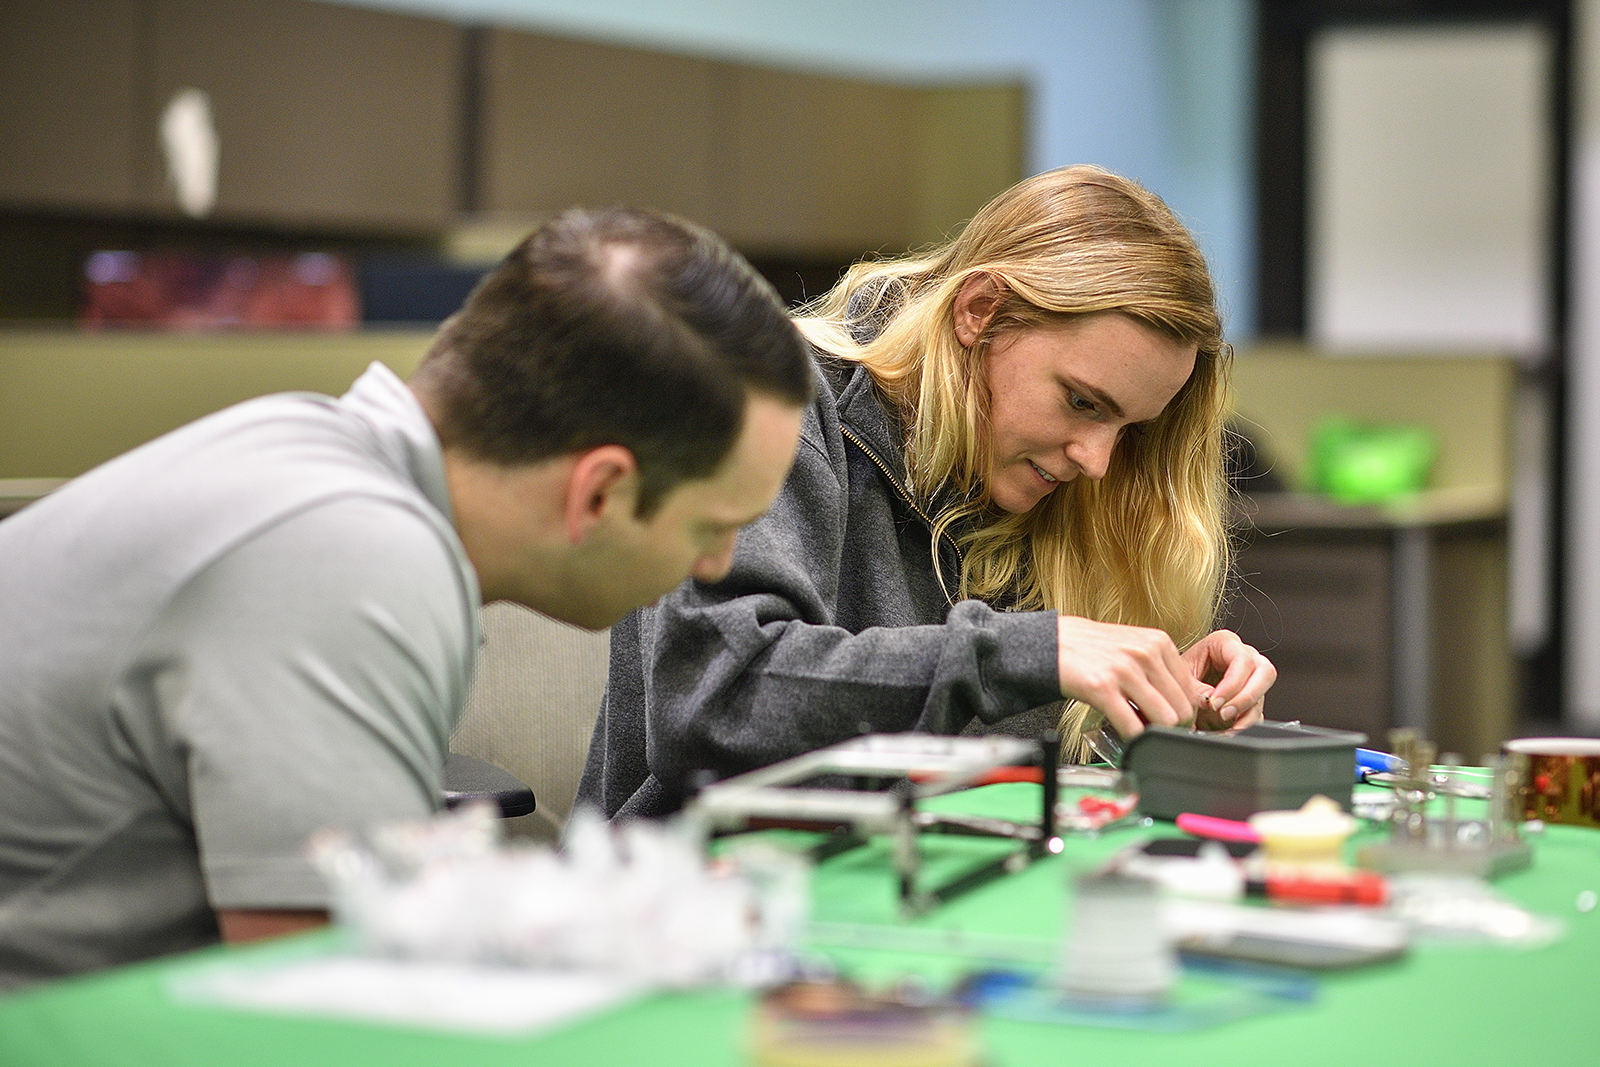 Brittney Thurston (Right) works with Michael Ayers on their Shape Memory Alloy system